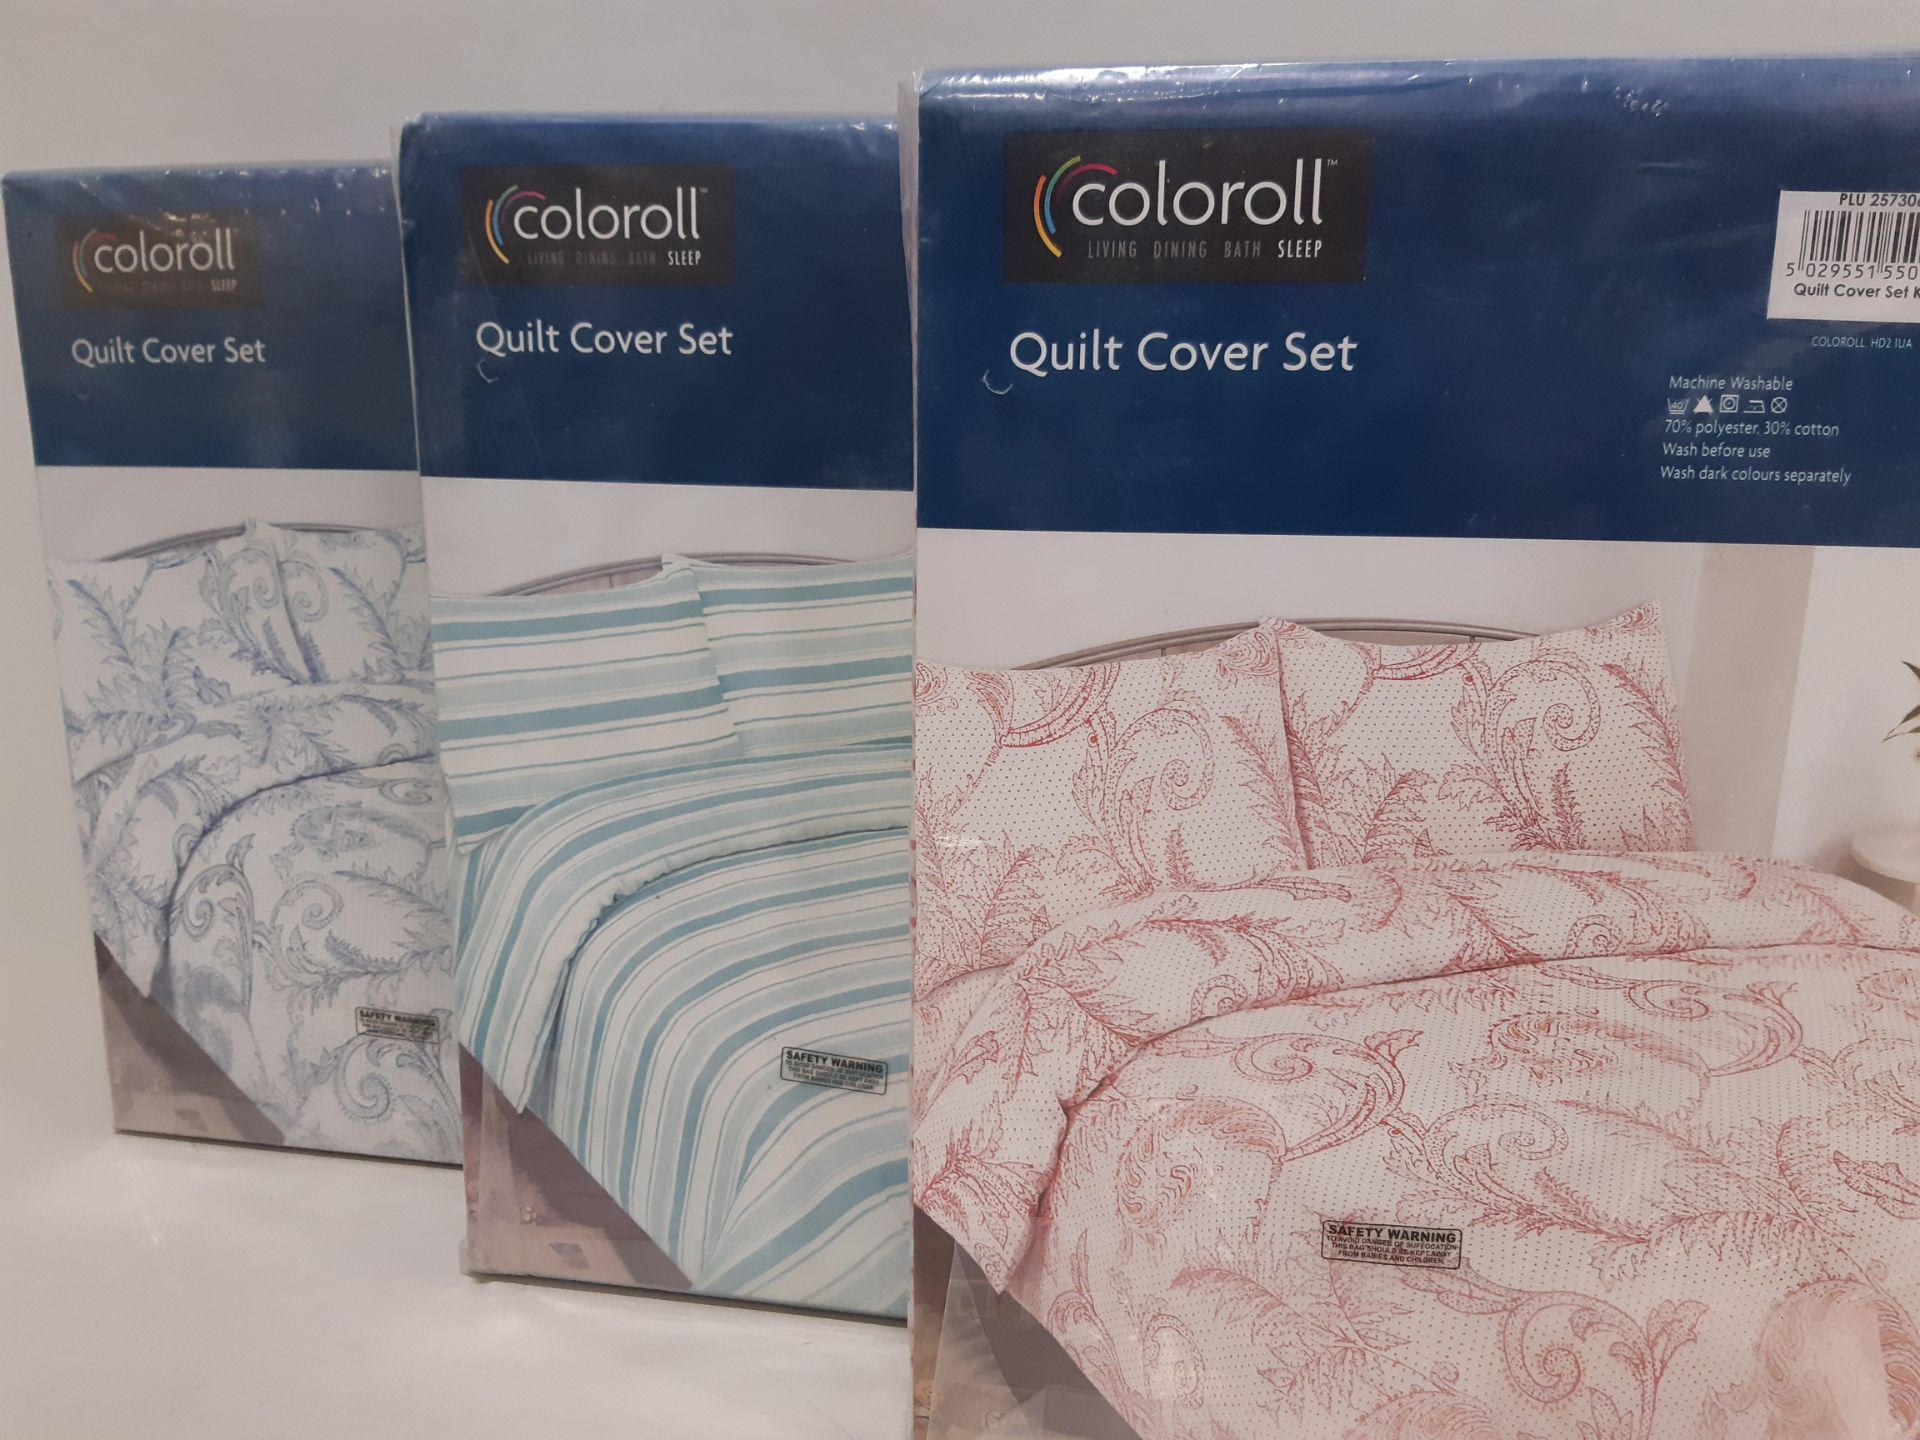 25 X BRAND NEW COLOROLL QUILT COVER SETS IN VARIOUS DESIGNS IE; BLUE FLORAL, PINK FLORAL, PINK AND